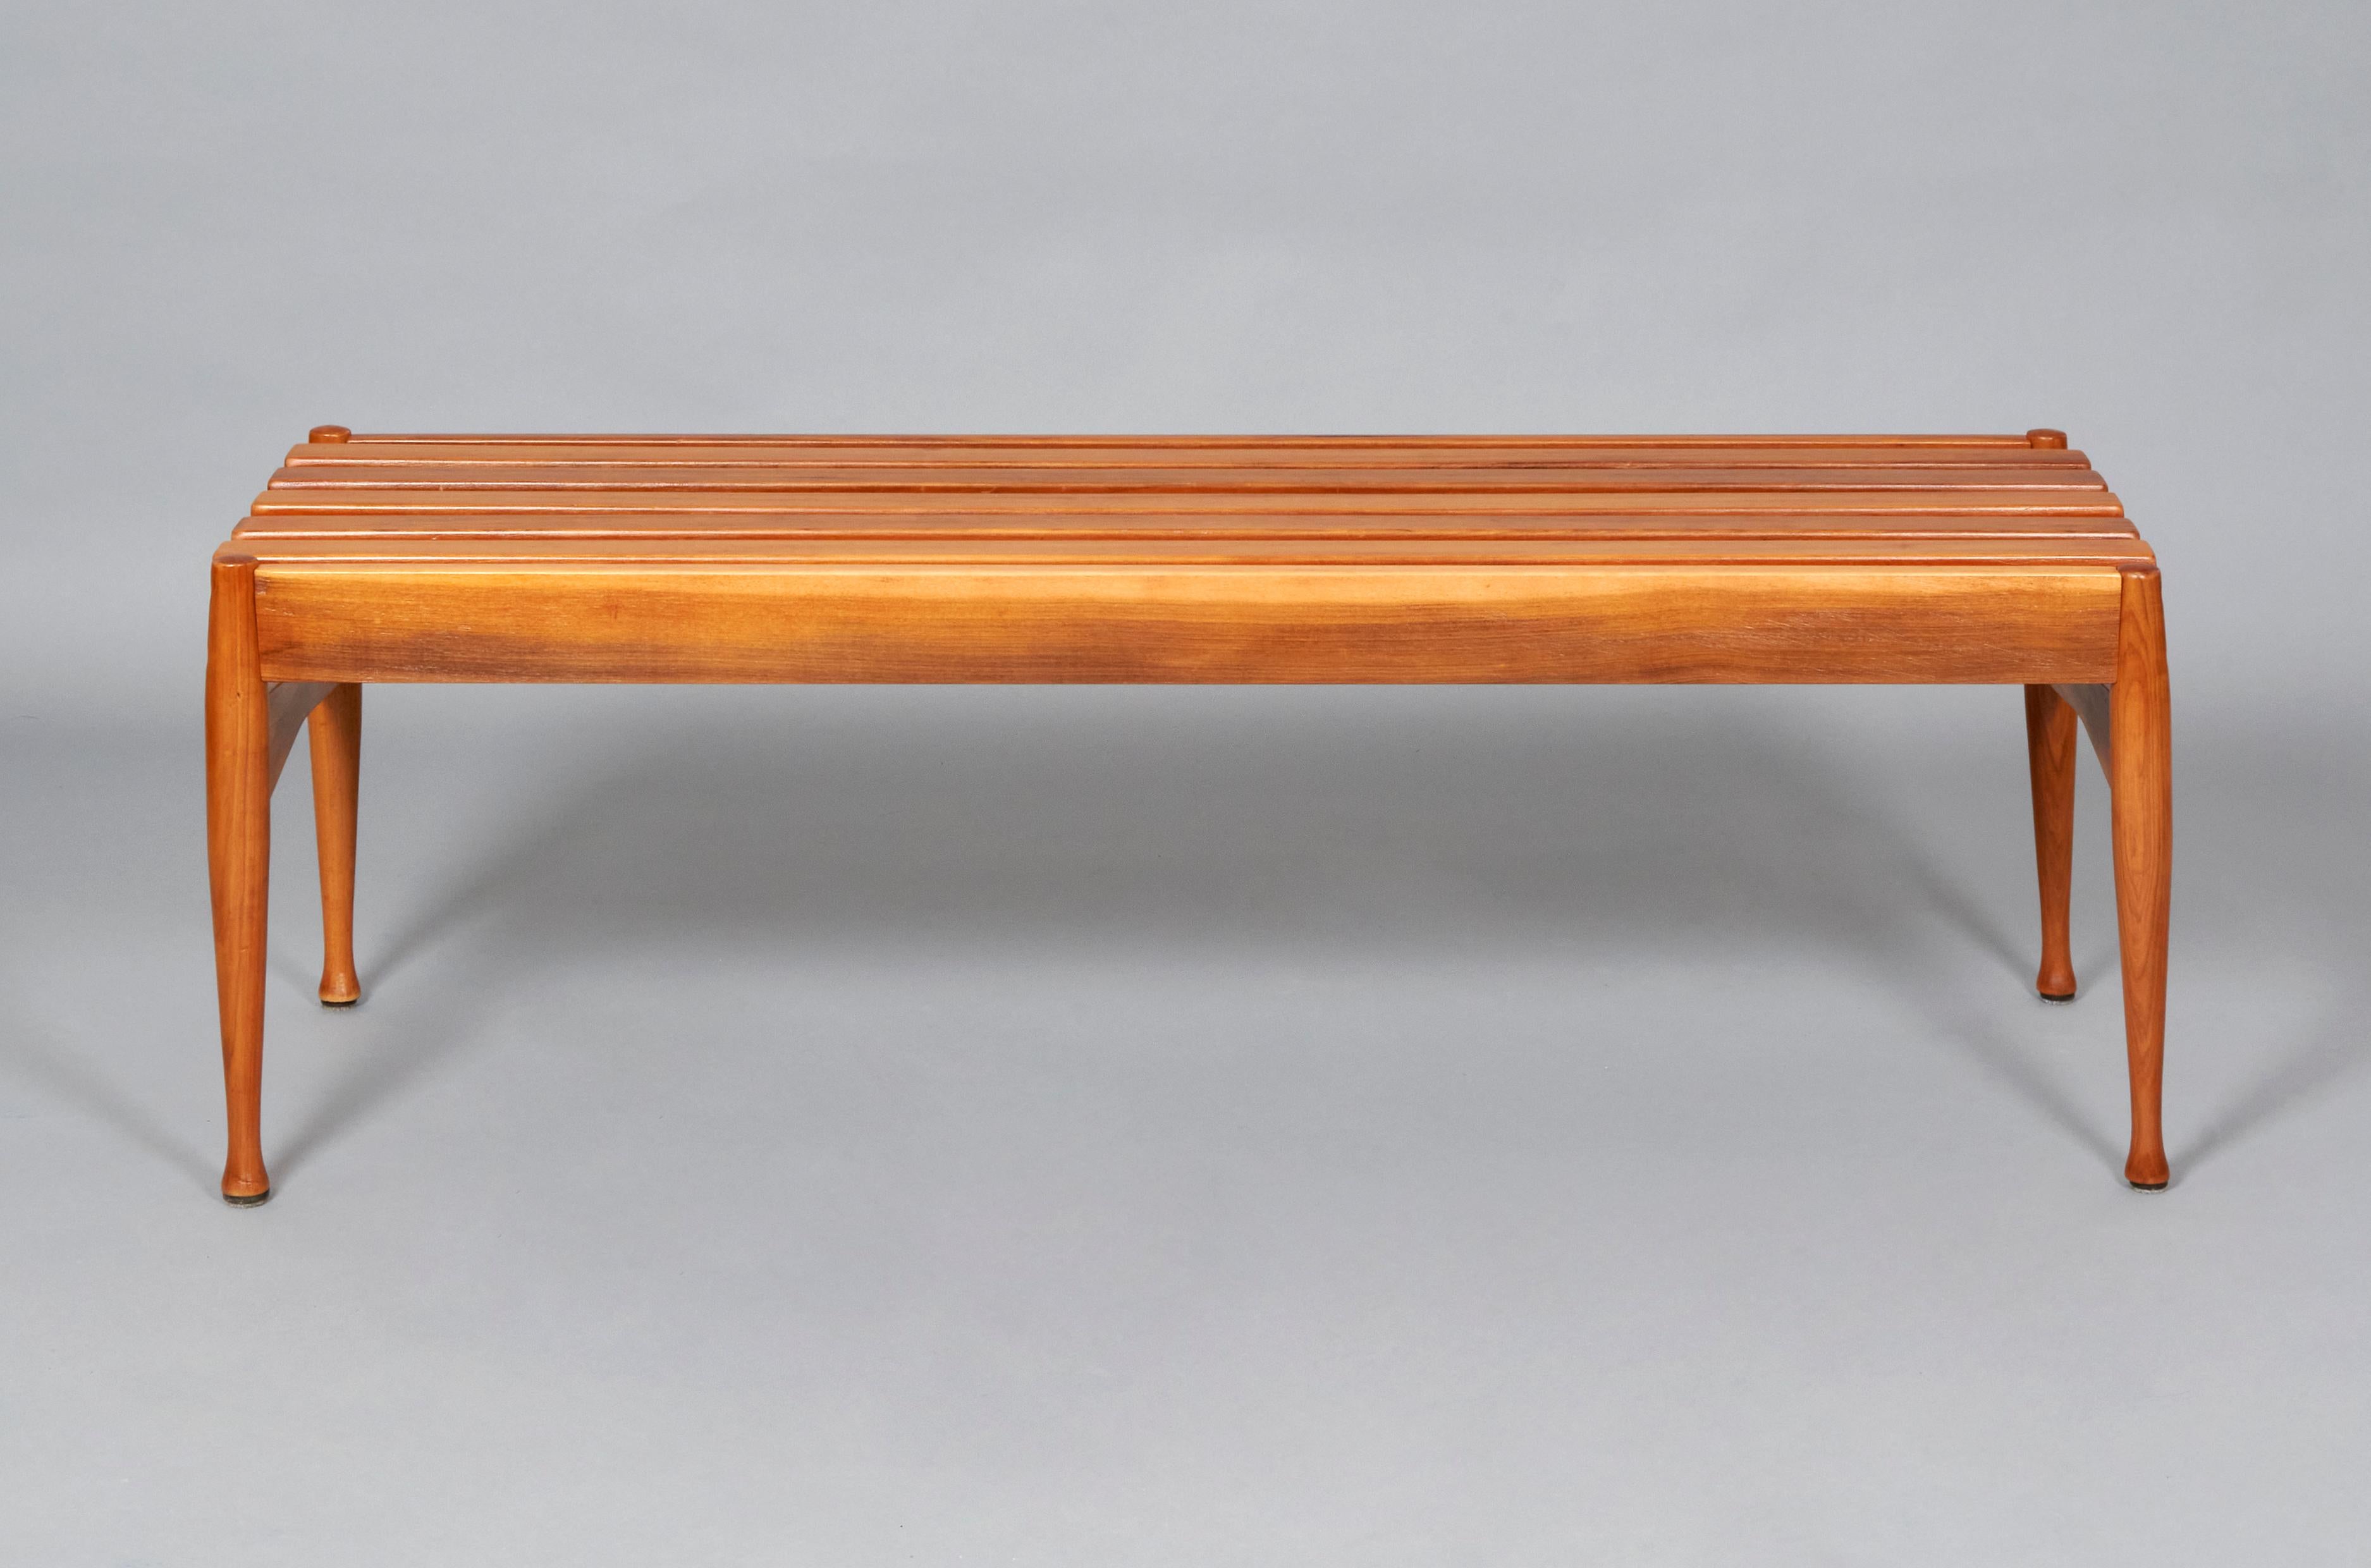 Tapered wood Bench fron unknown designer, in the style of Gio Ponti. Italy 1060s
Fratelli Reguitti was one of the main producers of Gio Ponti’s designed furniture. This bench is completely restored, in an excellent vintage condition the present